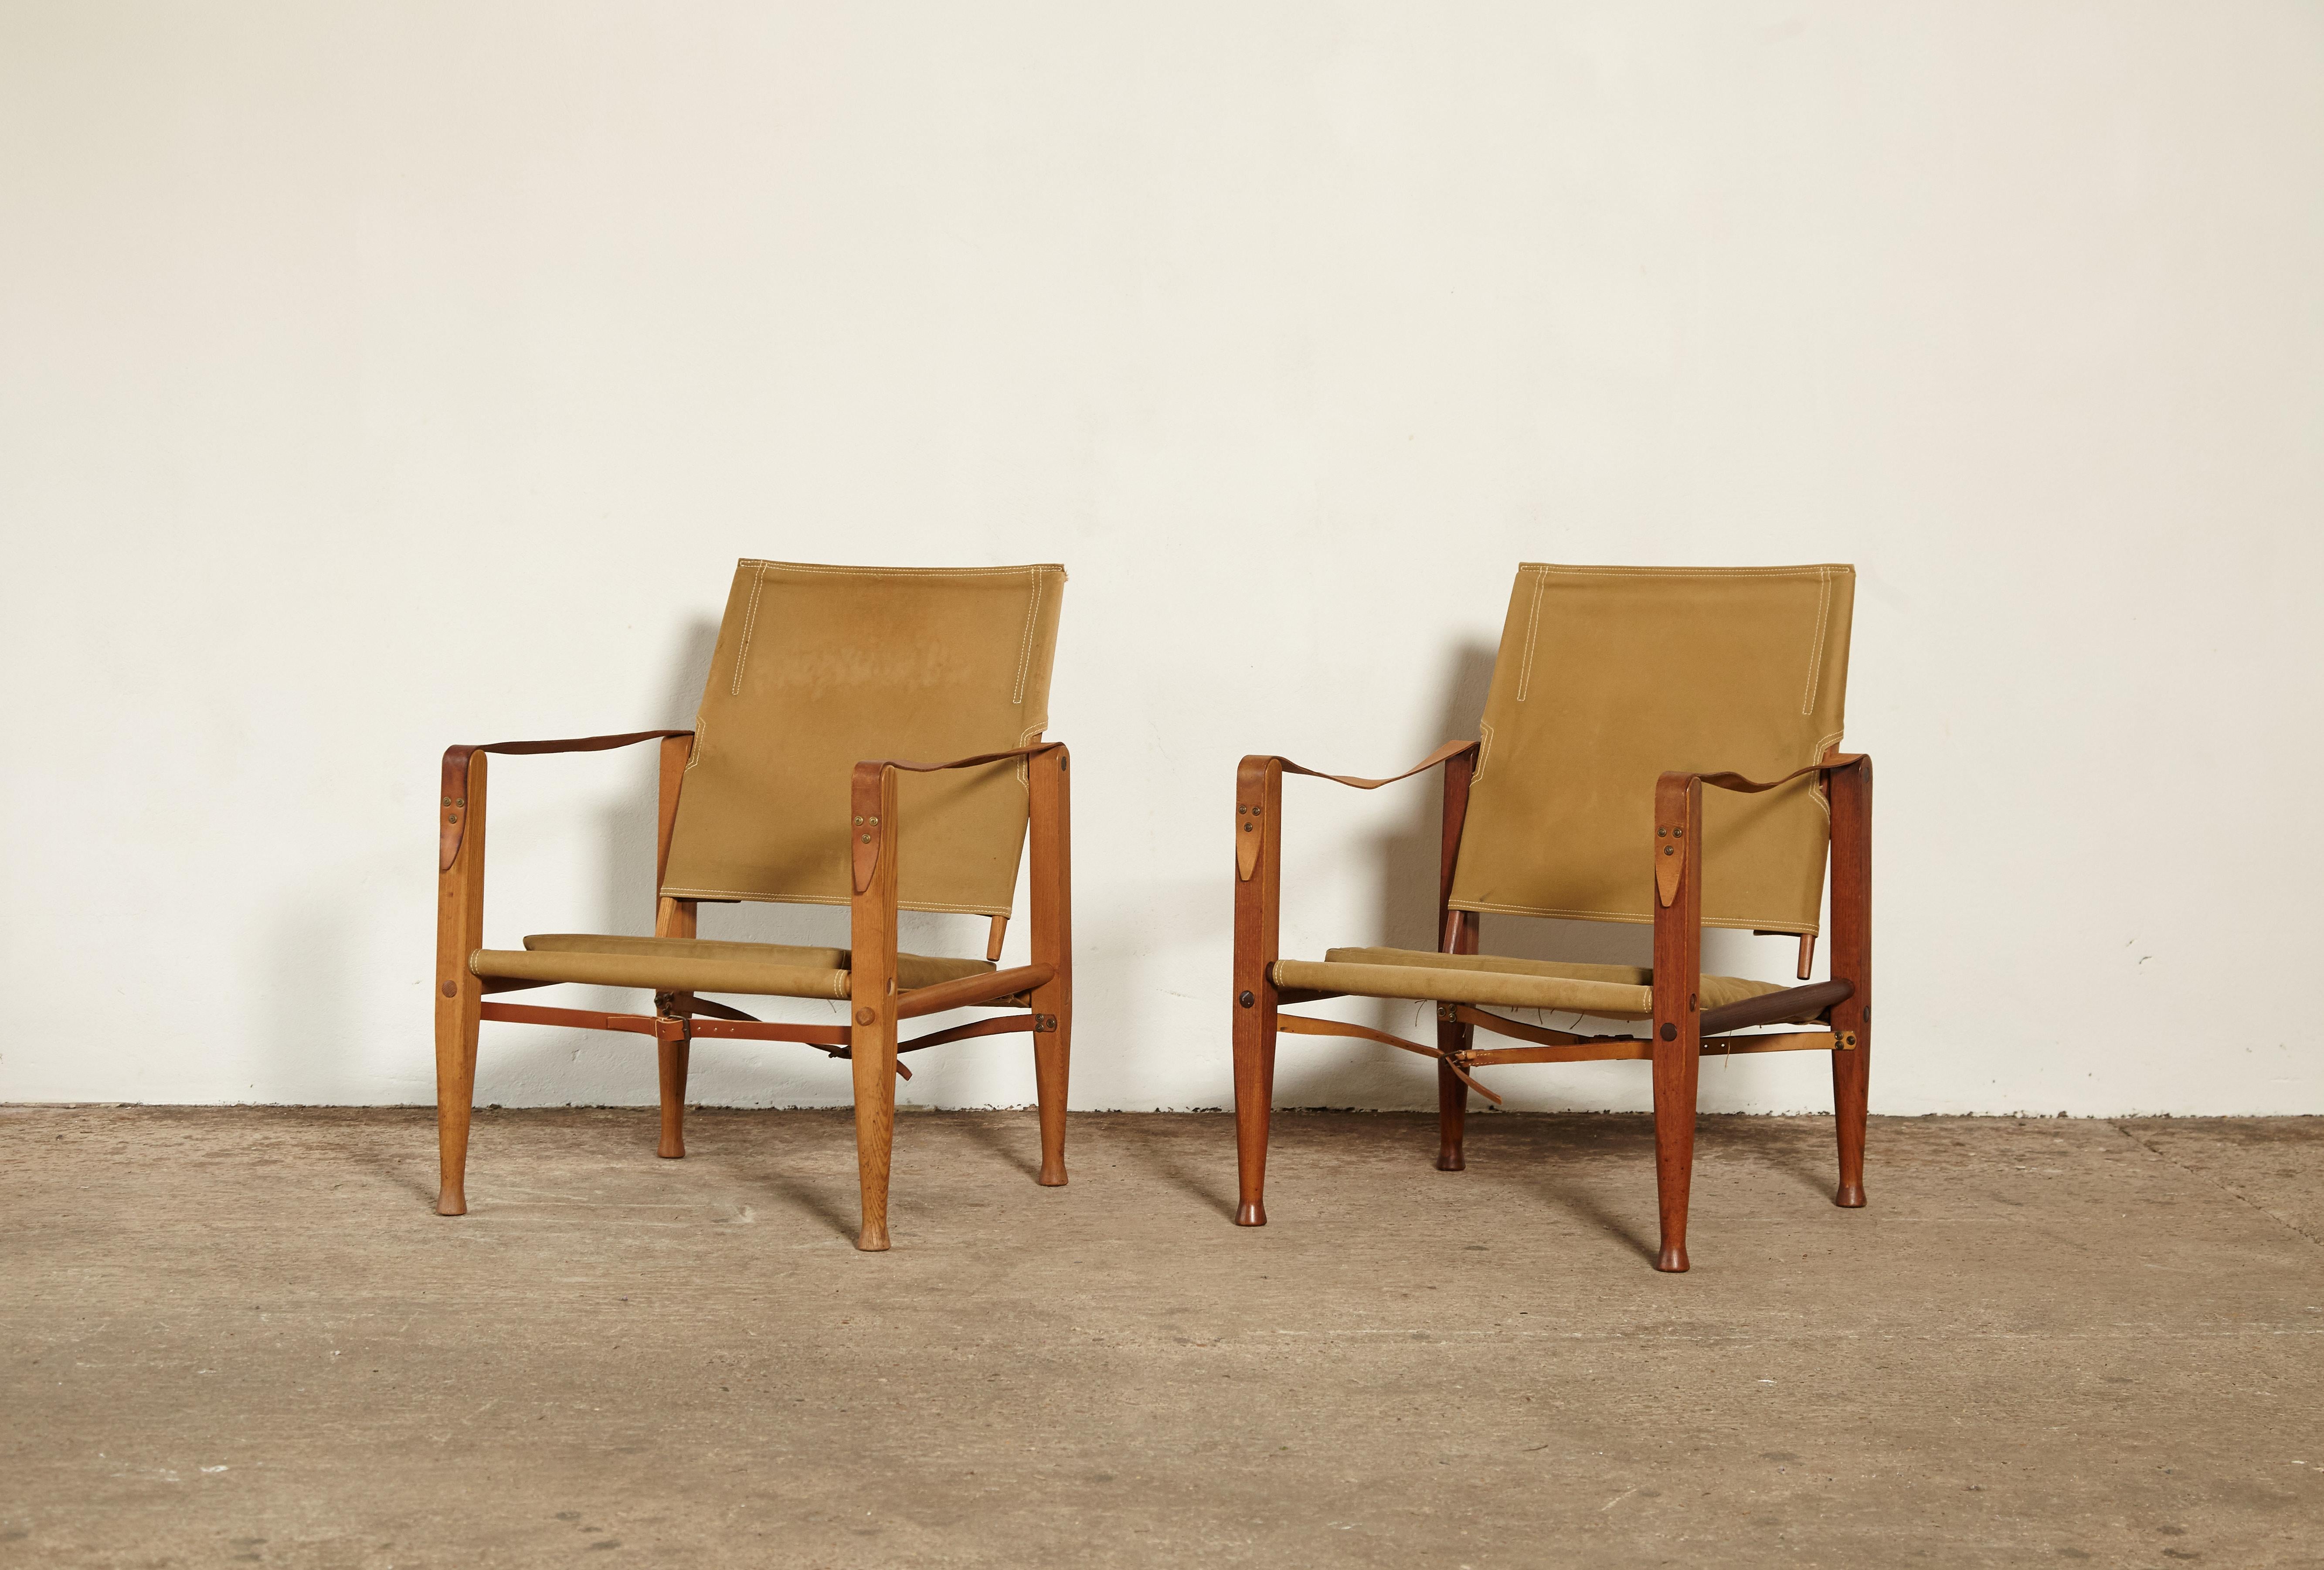 Two Kaare Klint safari chairs, sold as a pair, made by Rud Rasmussen, Denmark. Original olive or khaki canvas and ashwood. Slight variations in tone. Good structural condition but some old marks and stains on canvas as seen in photos. Inexpensive